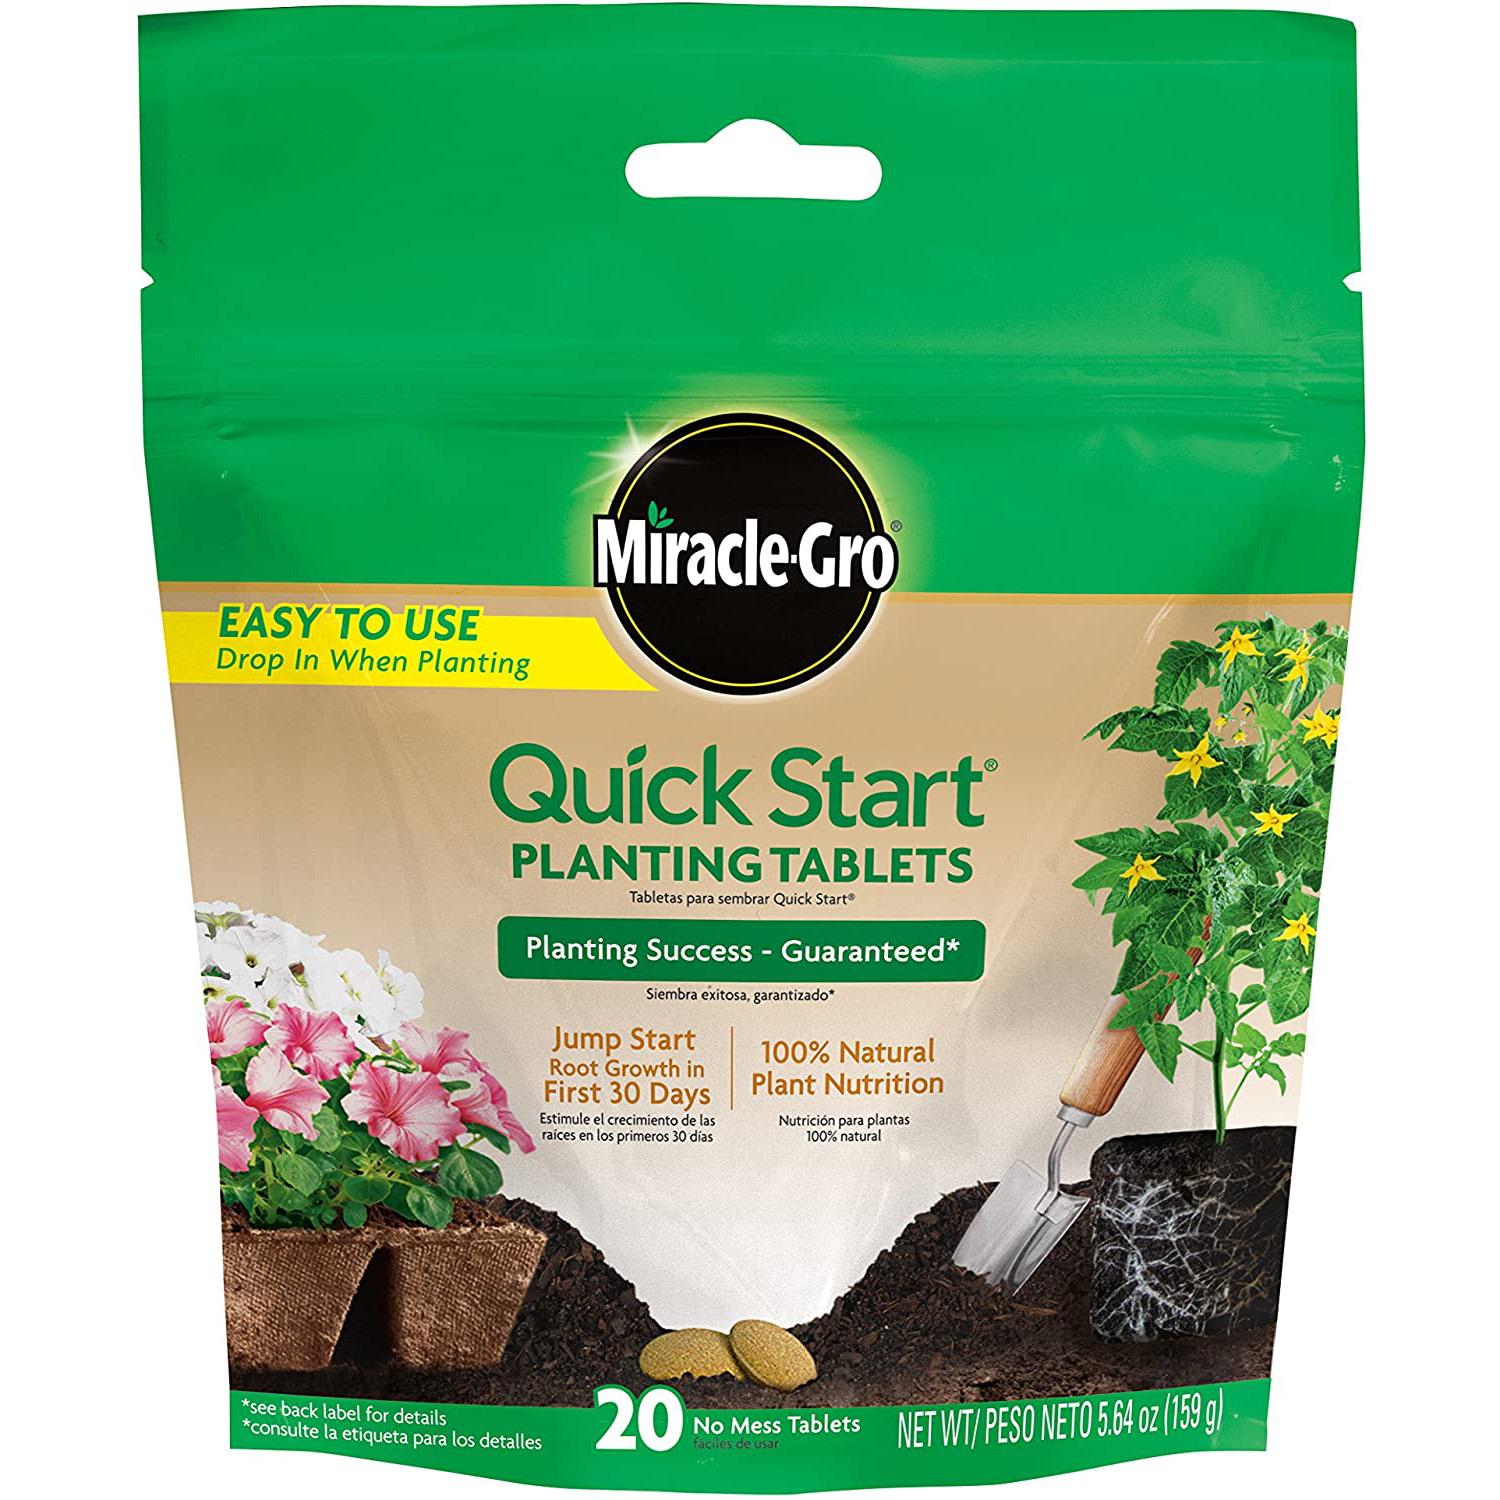 20-Count Miracle-Gro Quick Start Planting Tablets for $3.80